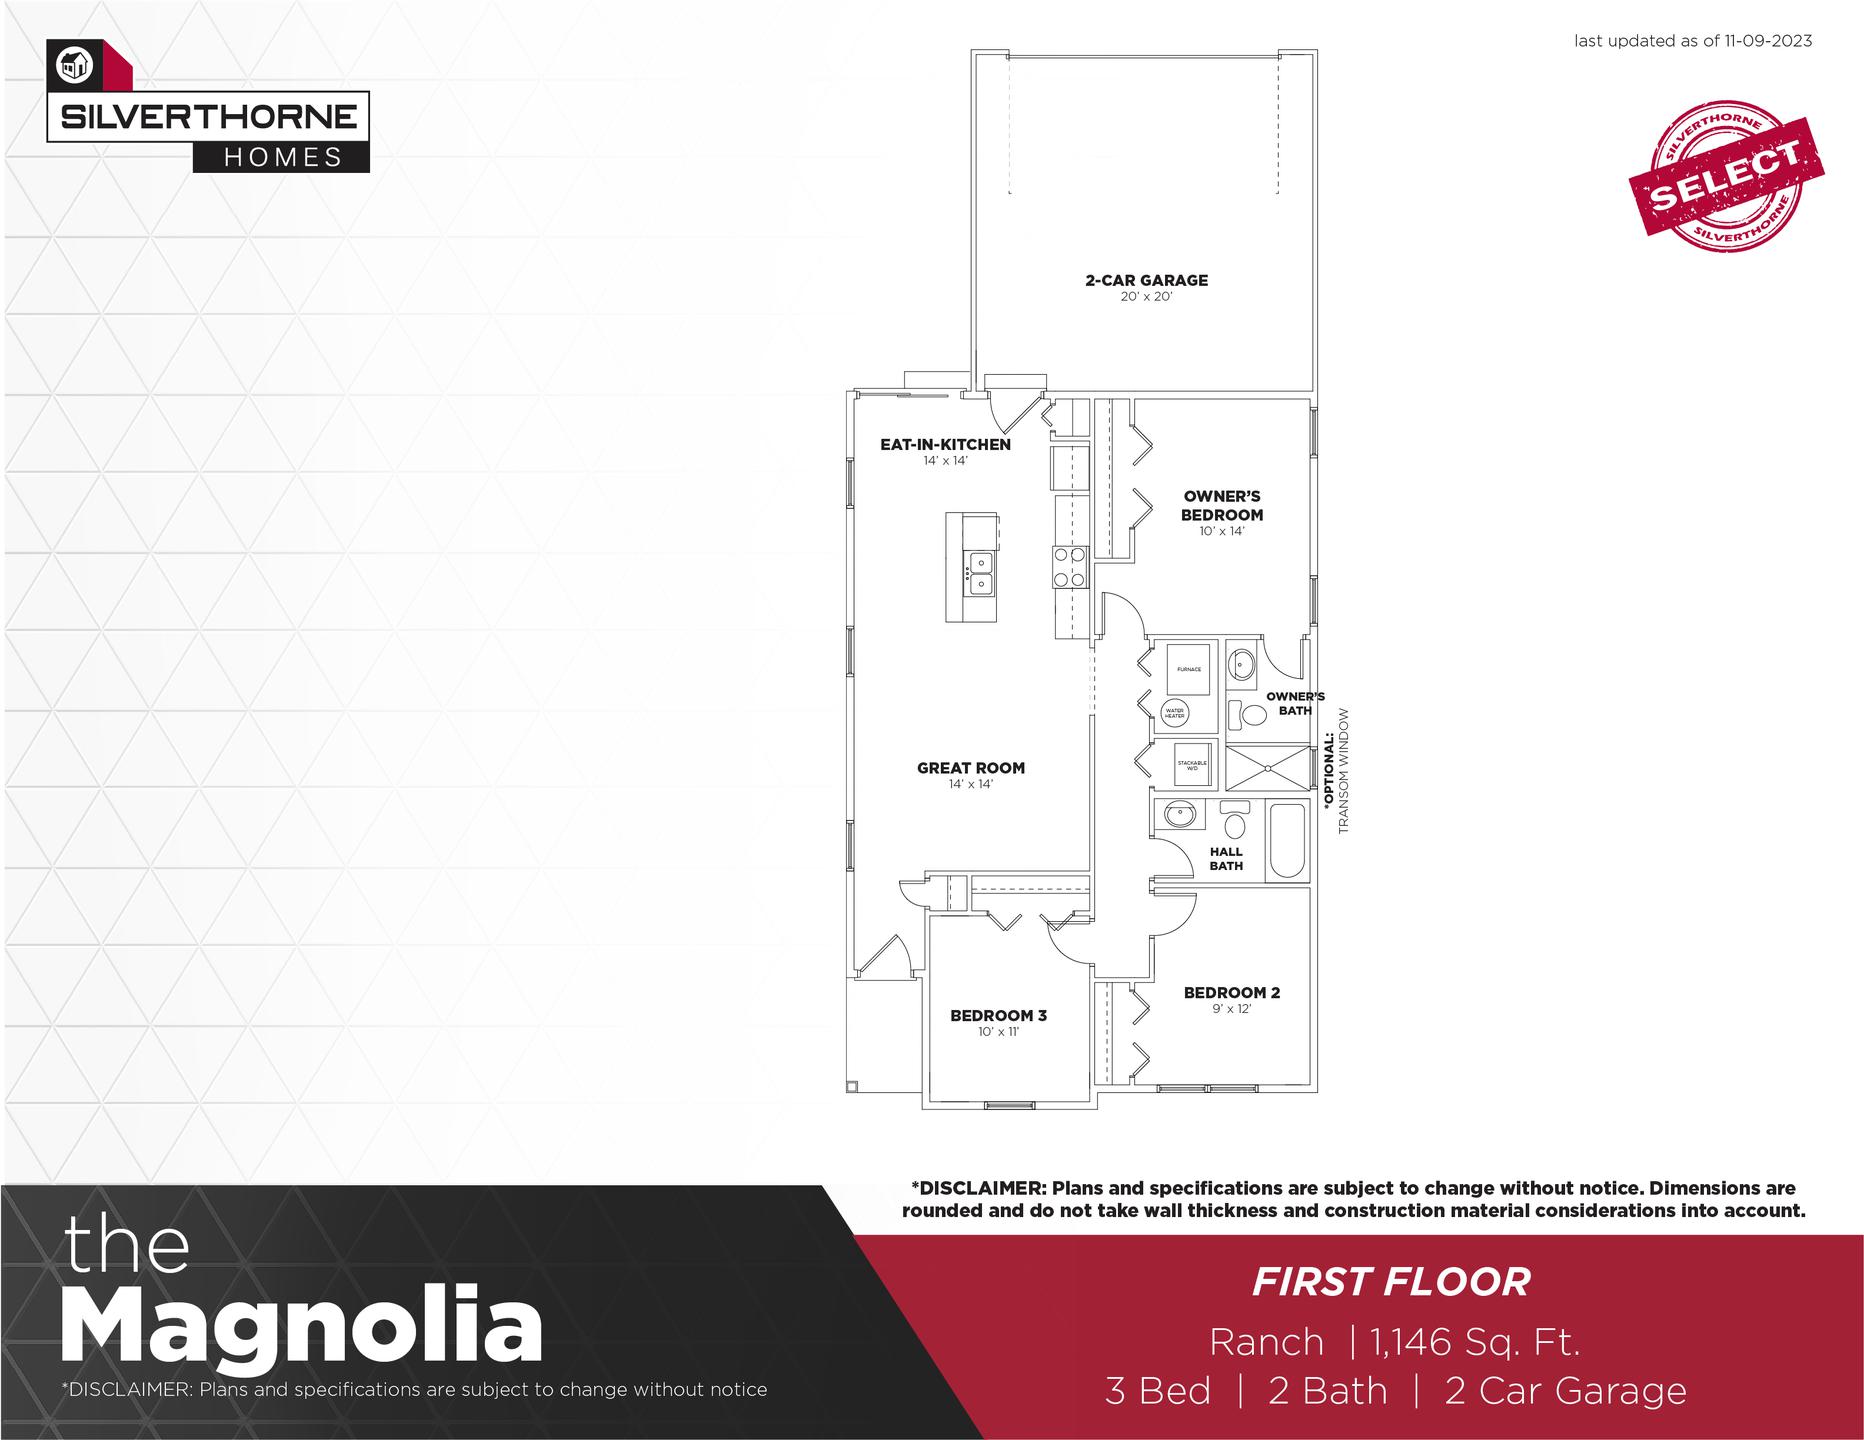 The Magnolia Home with 3 Bedrooms